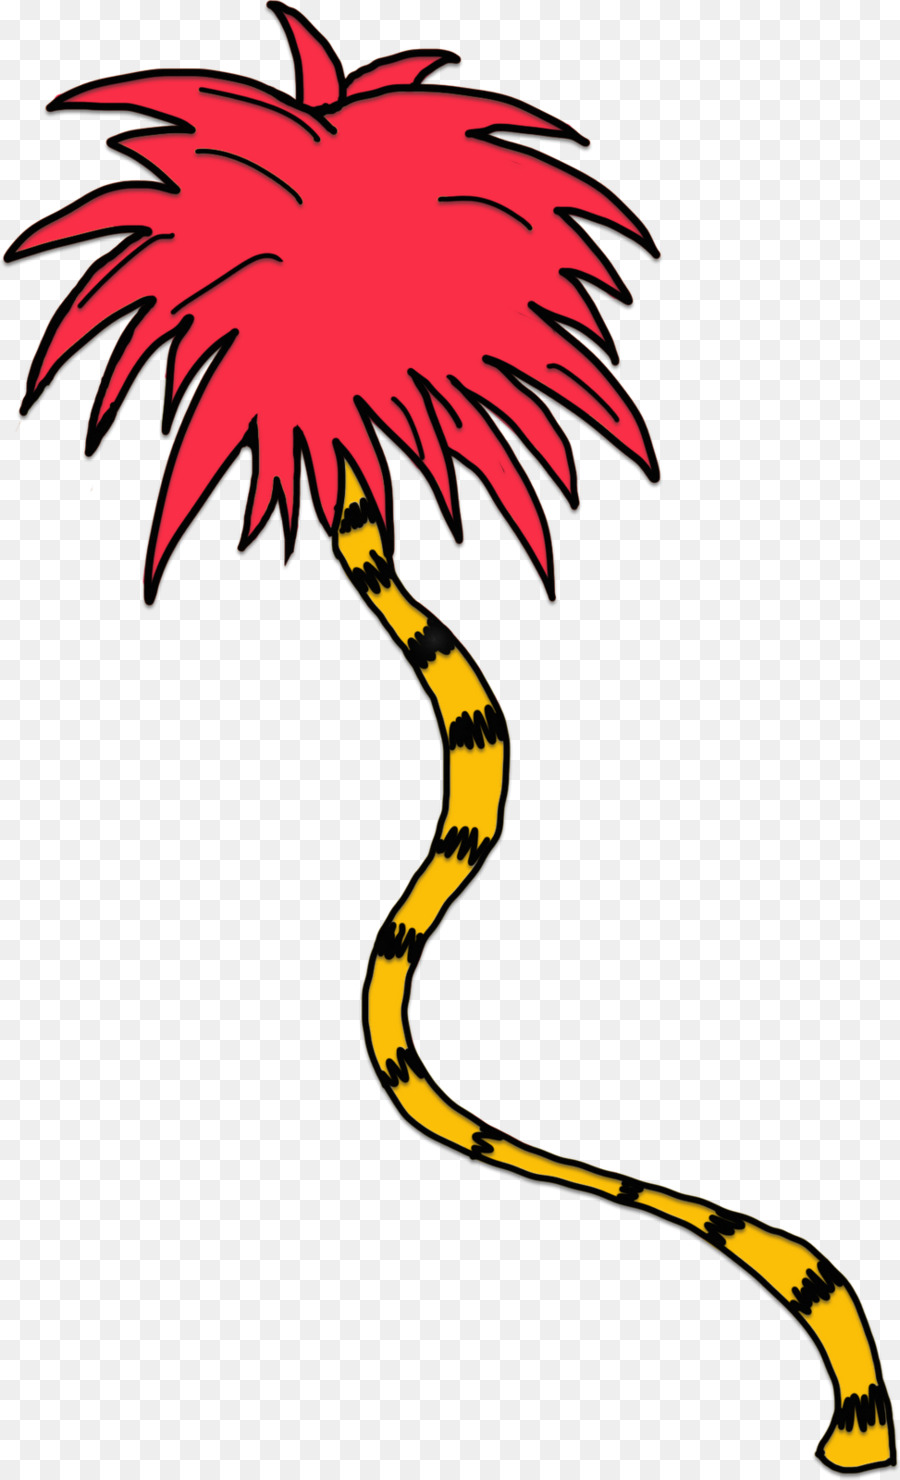 The Lorax The Cat in the Hat One Fish, Two Fish, Red Fish, Blue Fish Fox in Socks Grinch - dr seuss png download - 973*1600 - Free Transparent Lorax png Download.